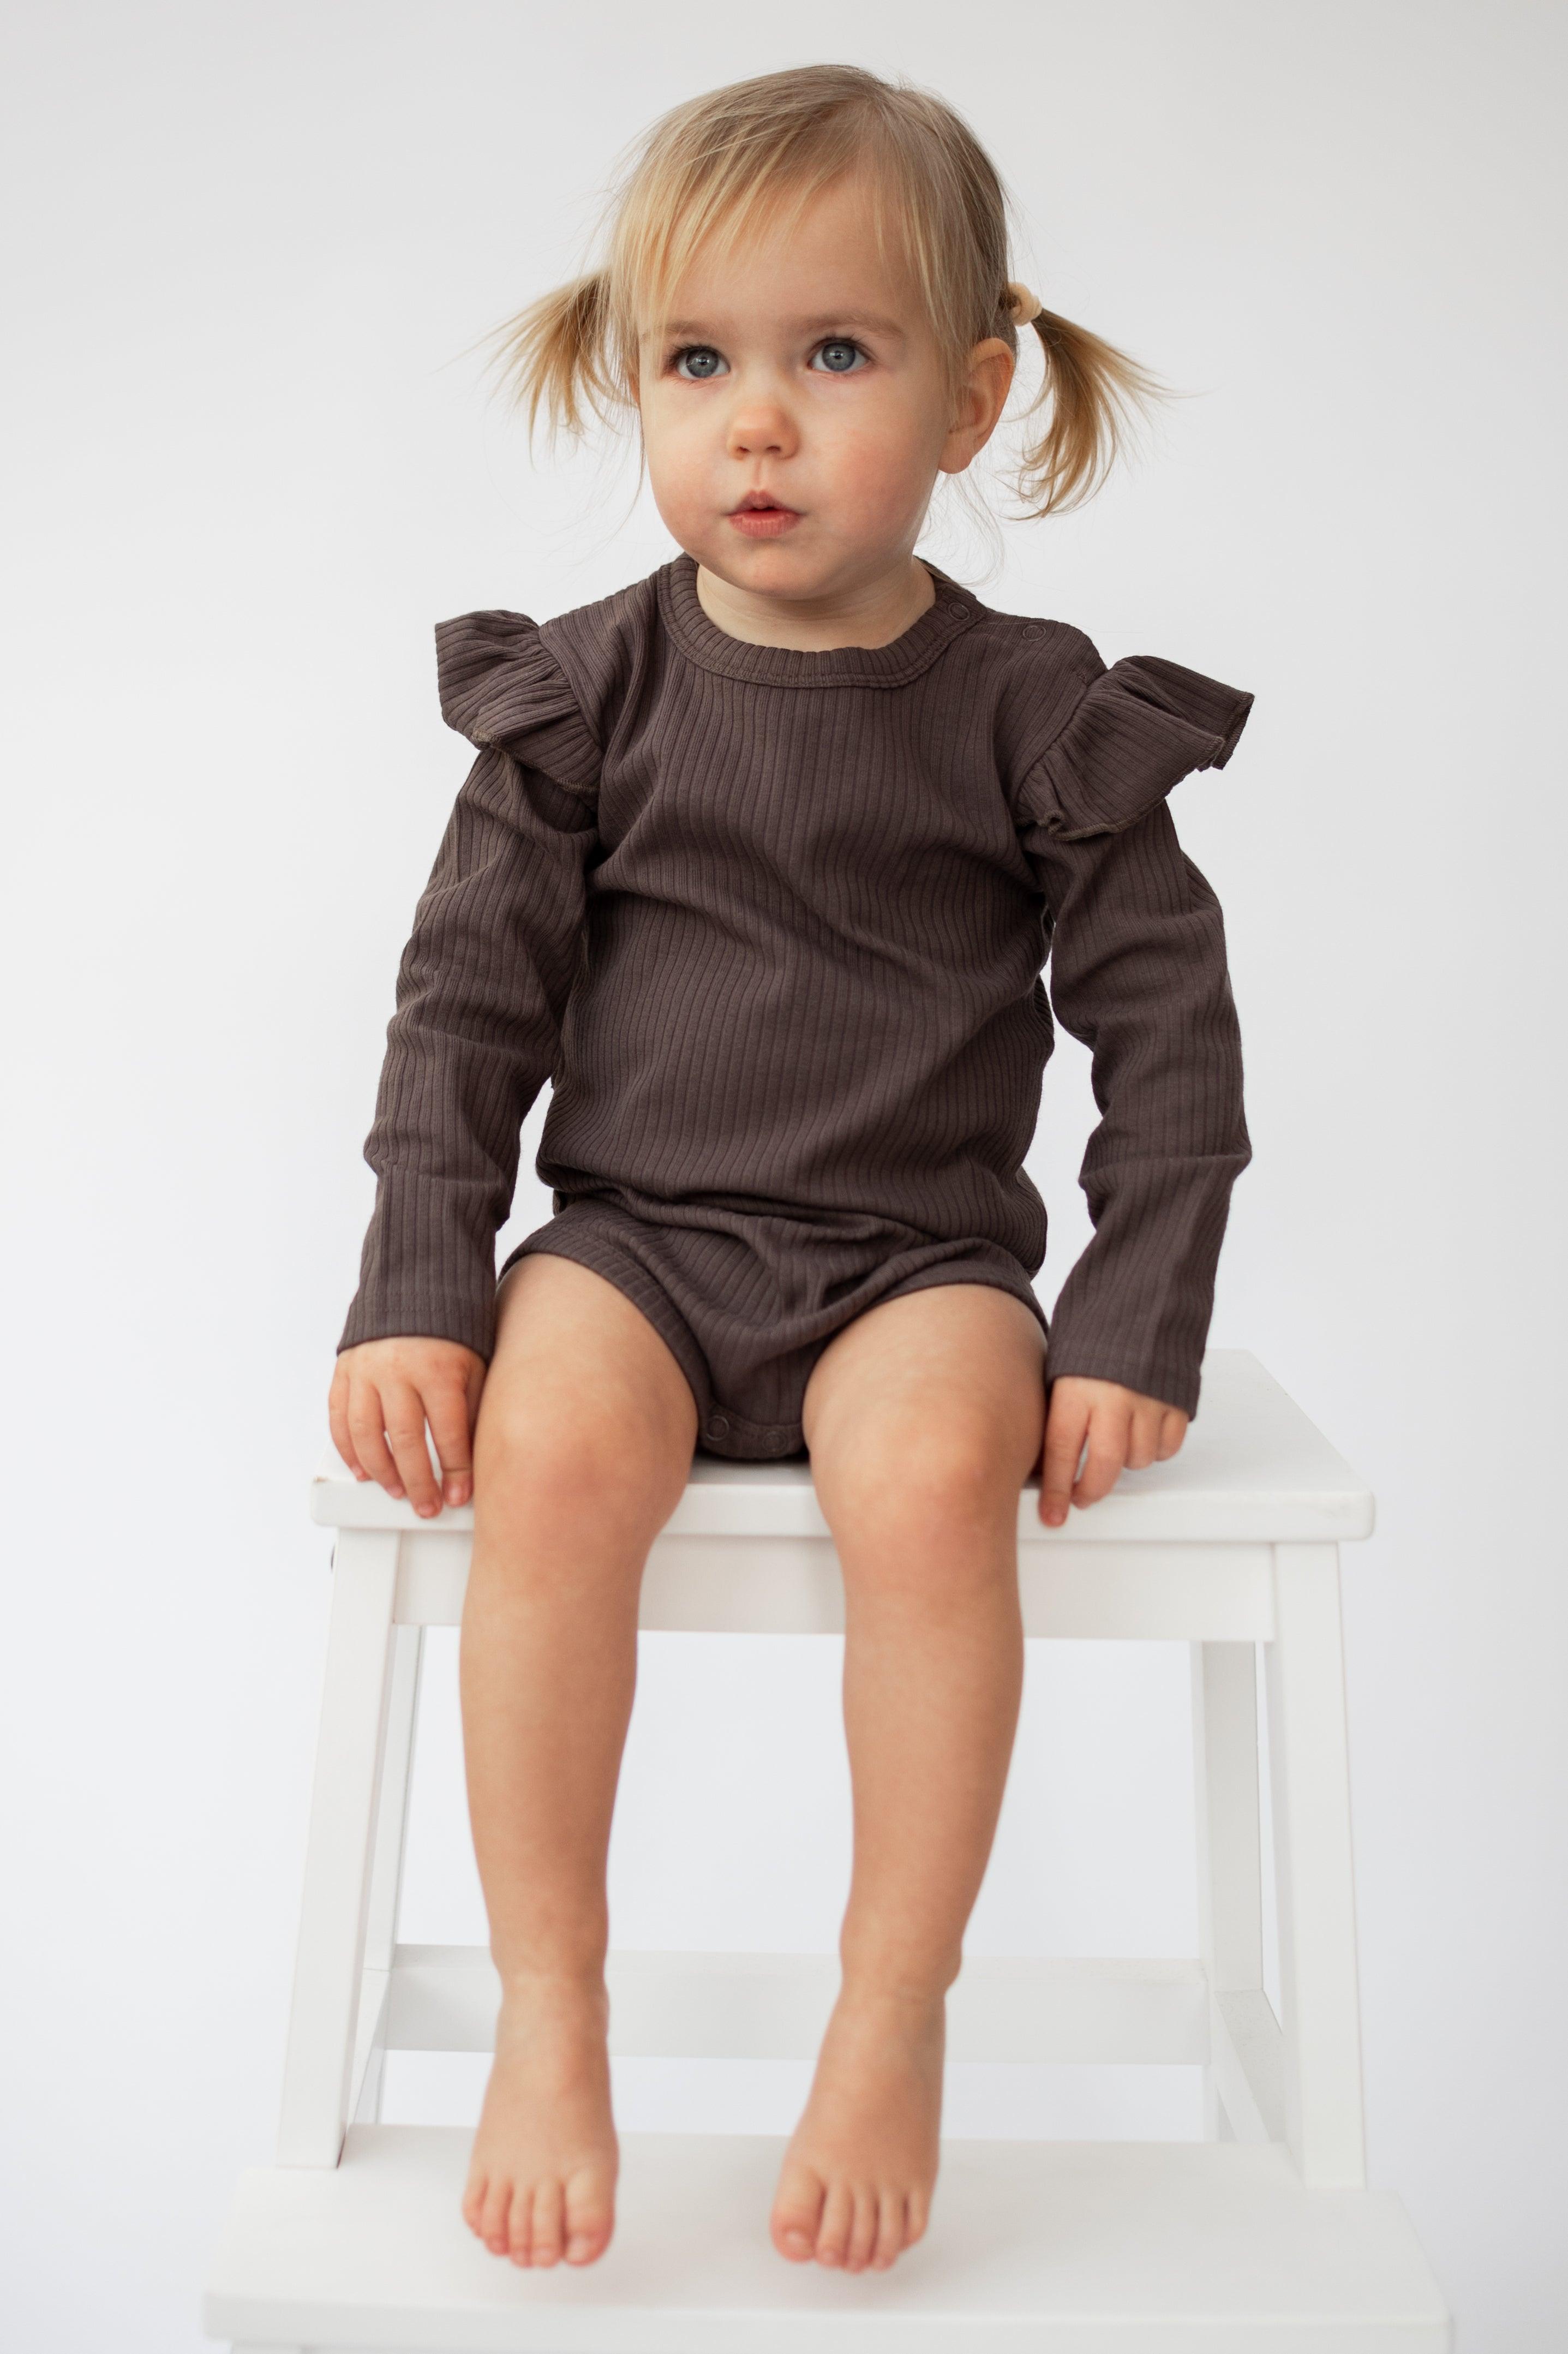 files/charcoal-greybrown-frill-long-sleeve-bodysuit-claybearofficial-1.jpg